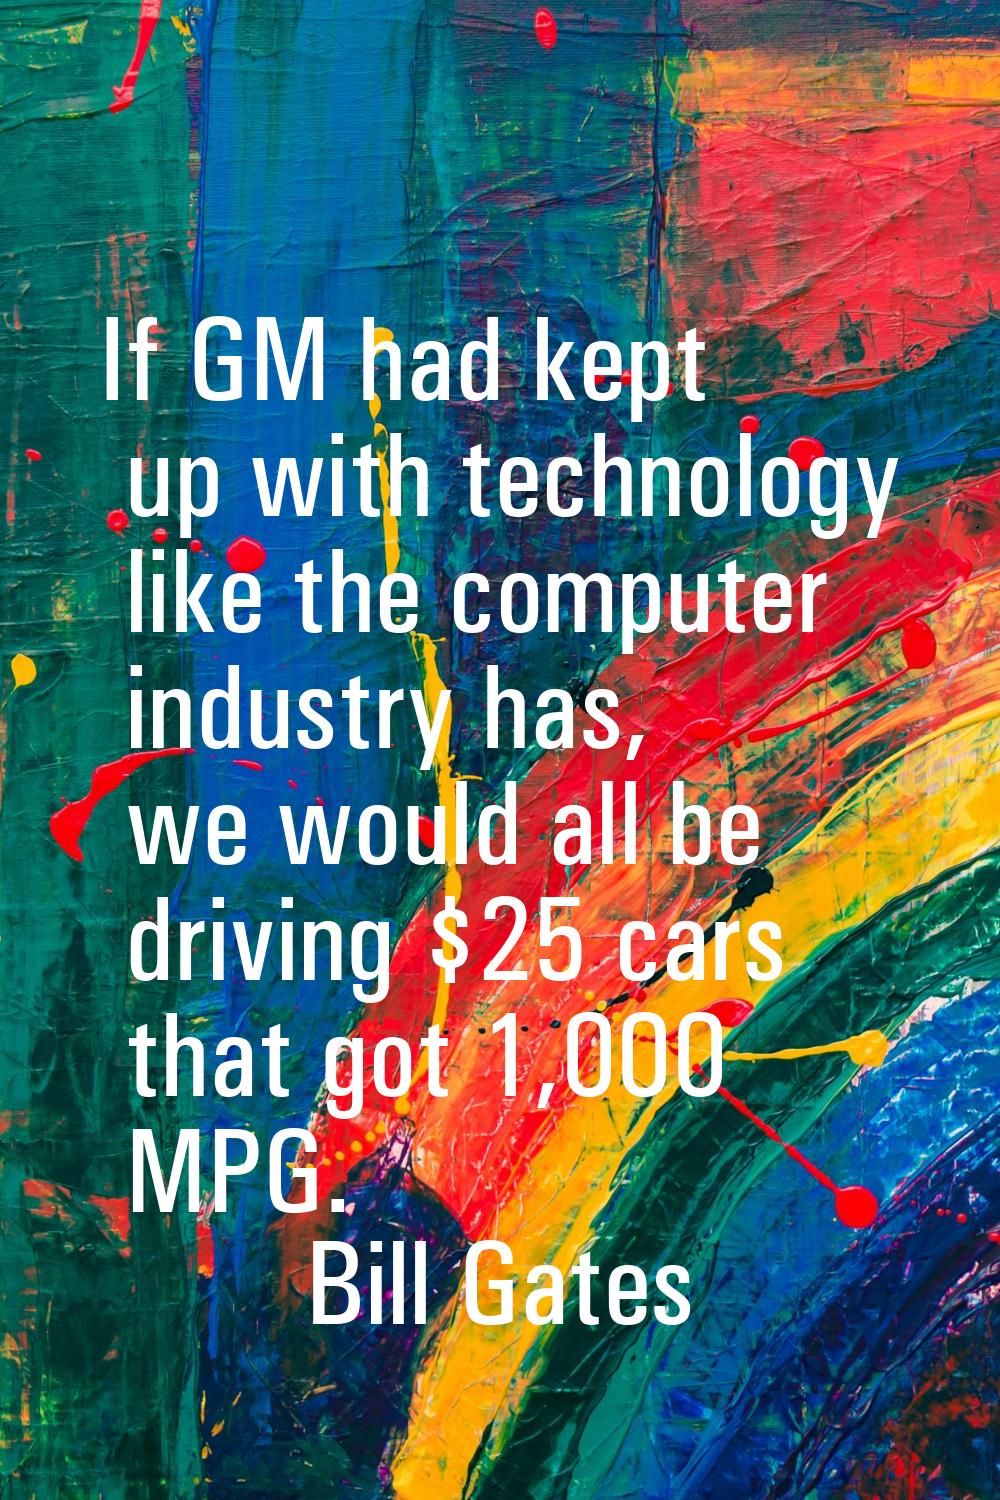 If GM had kept up with technology like the computer industry has, we would all be driving $25 cars 